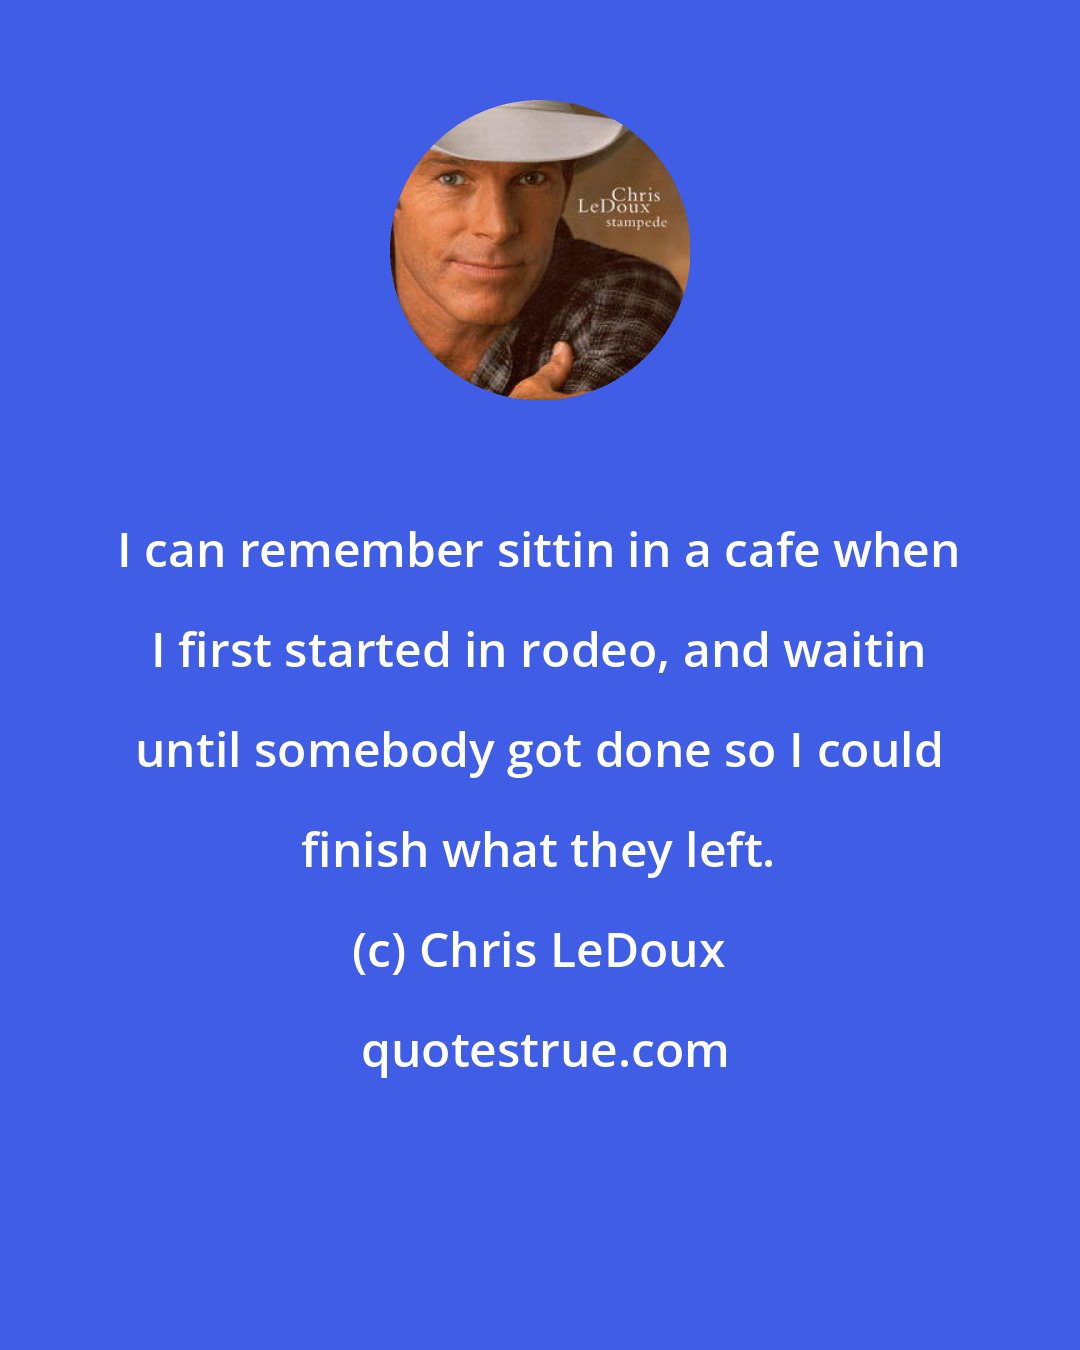 Chris LeDoux: I can remember sittin in a cafe when I first started in rodeo, and waitin until somebody got done so I could finish what they left.